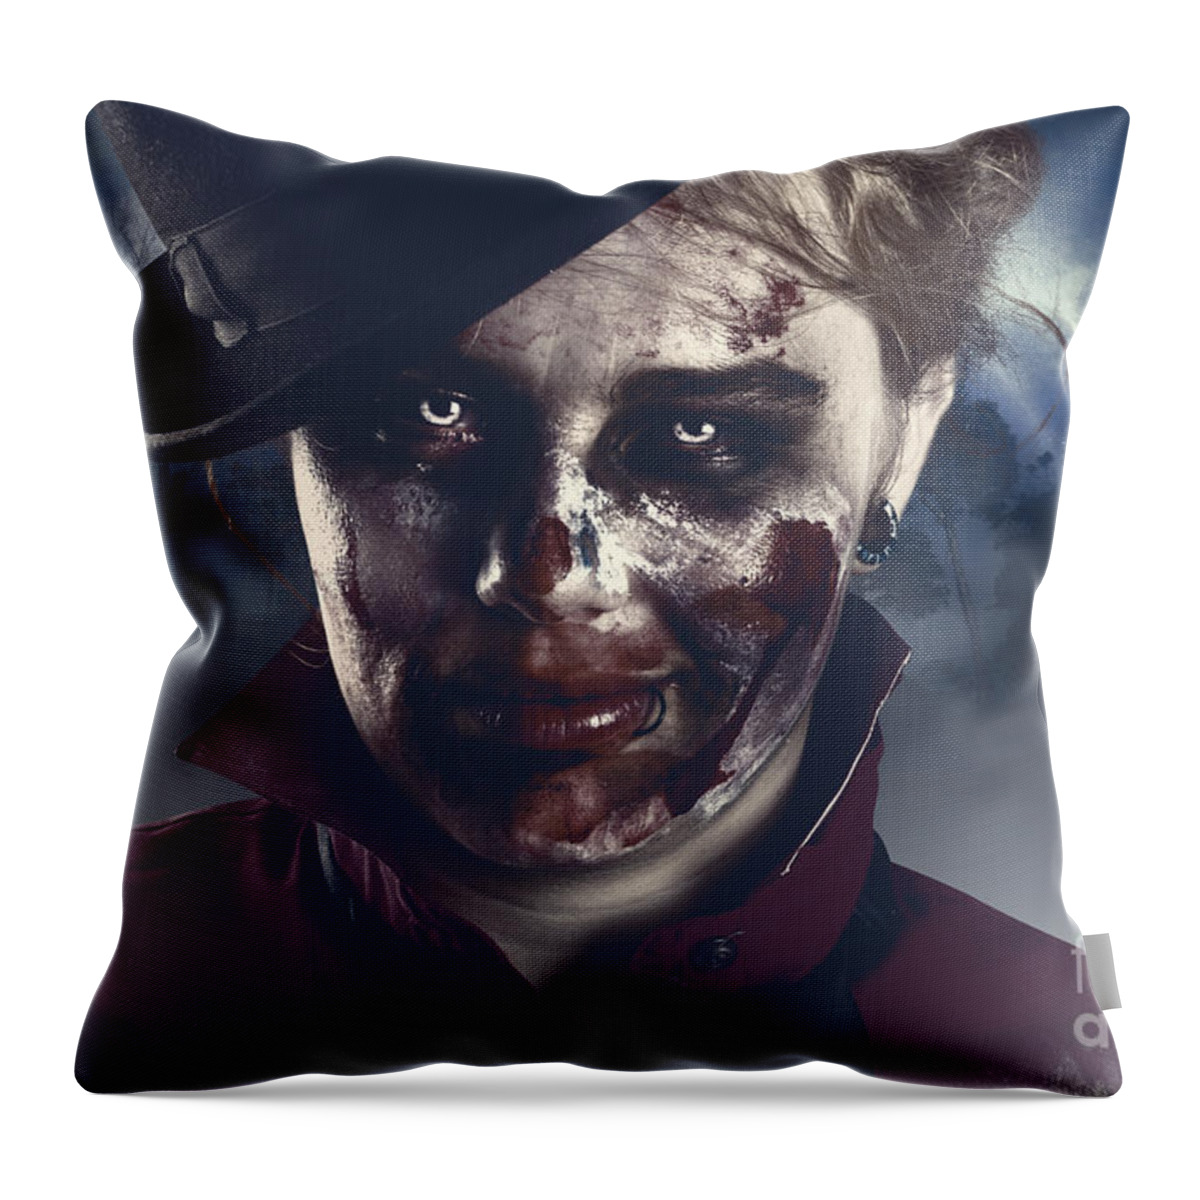 Apocalypse Throw Pillow featuring the photograph Twilight nightmare. Possessed halloween girl by Jorgo Photography